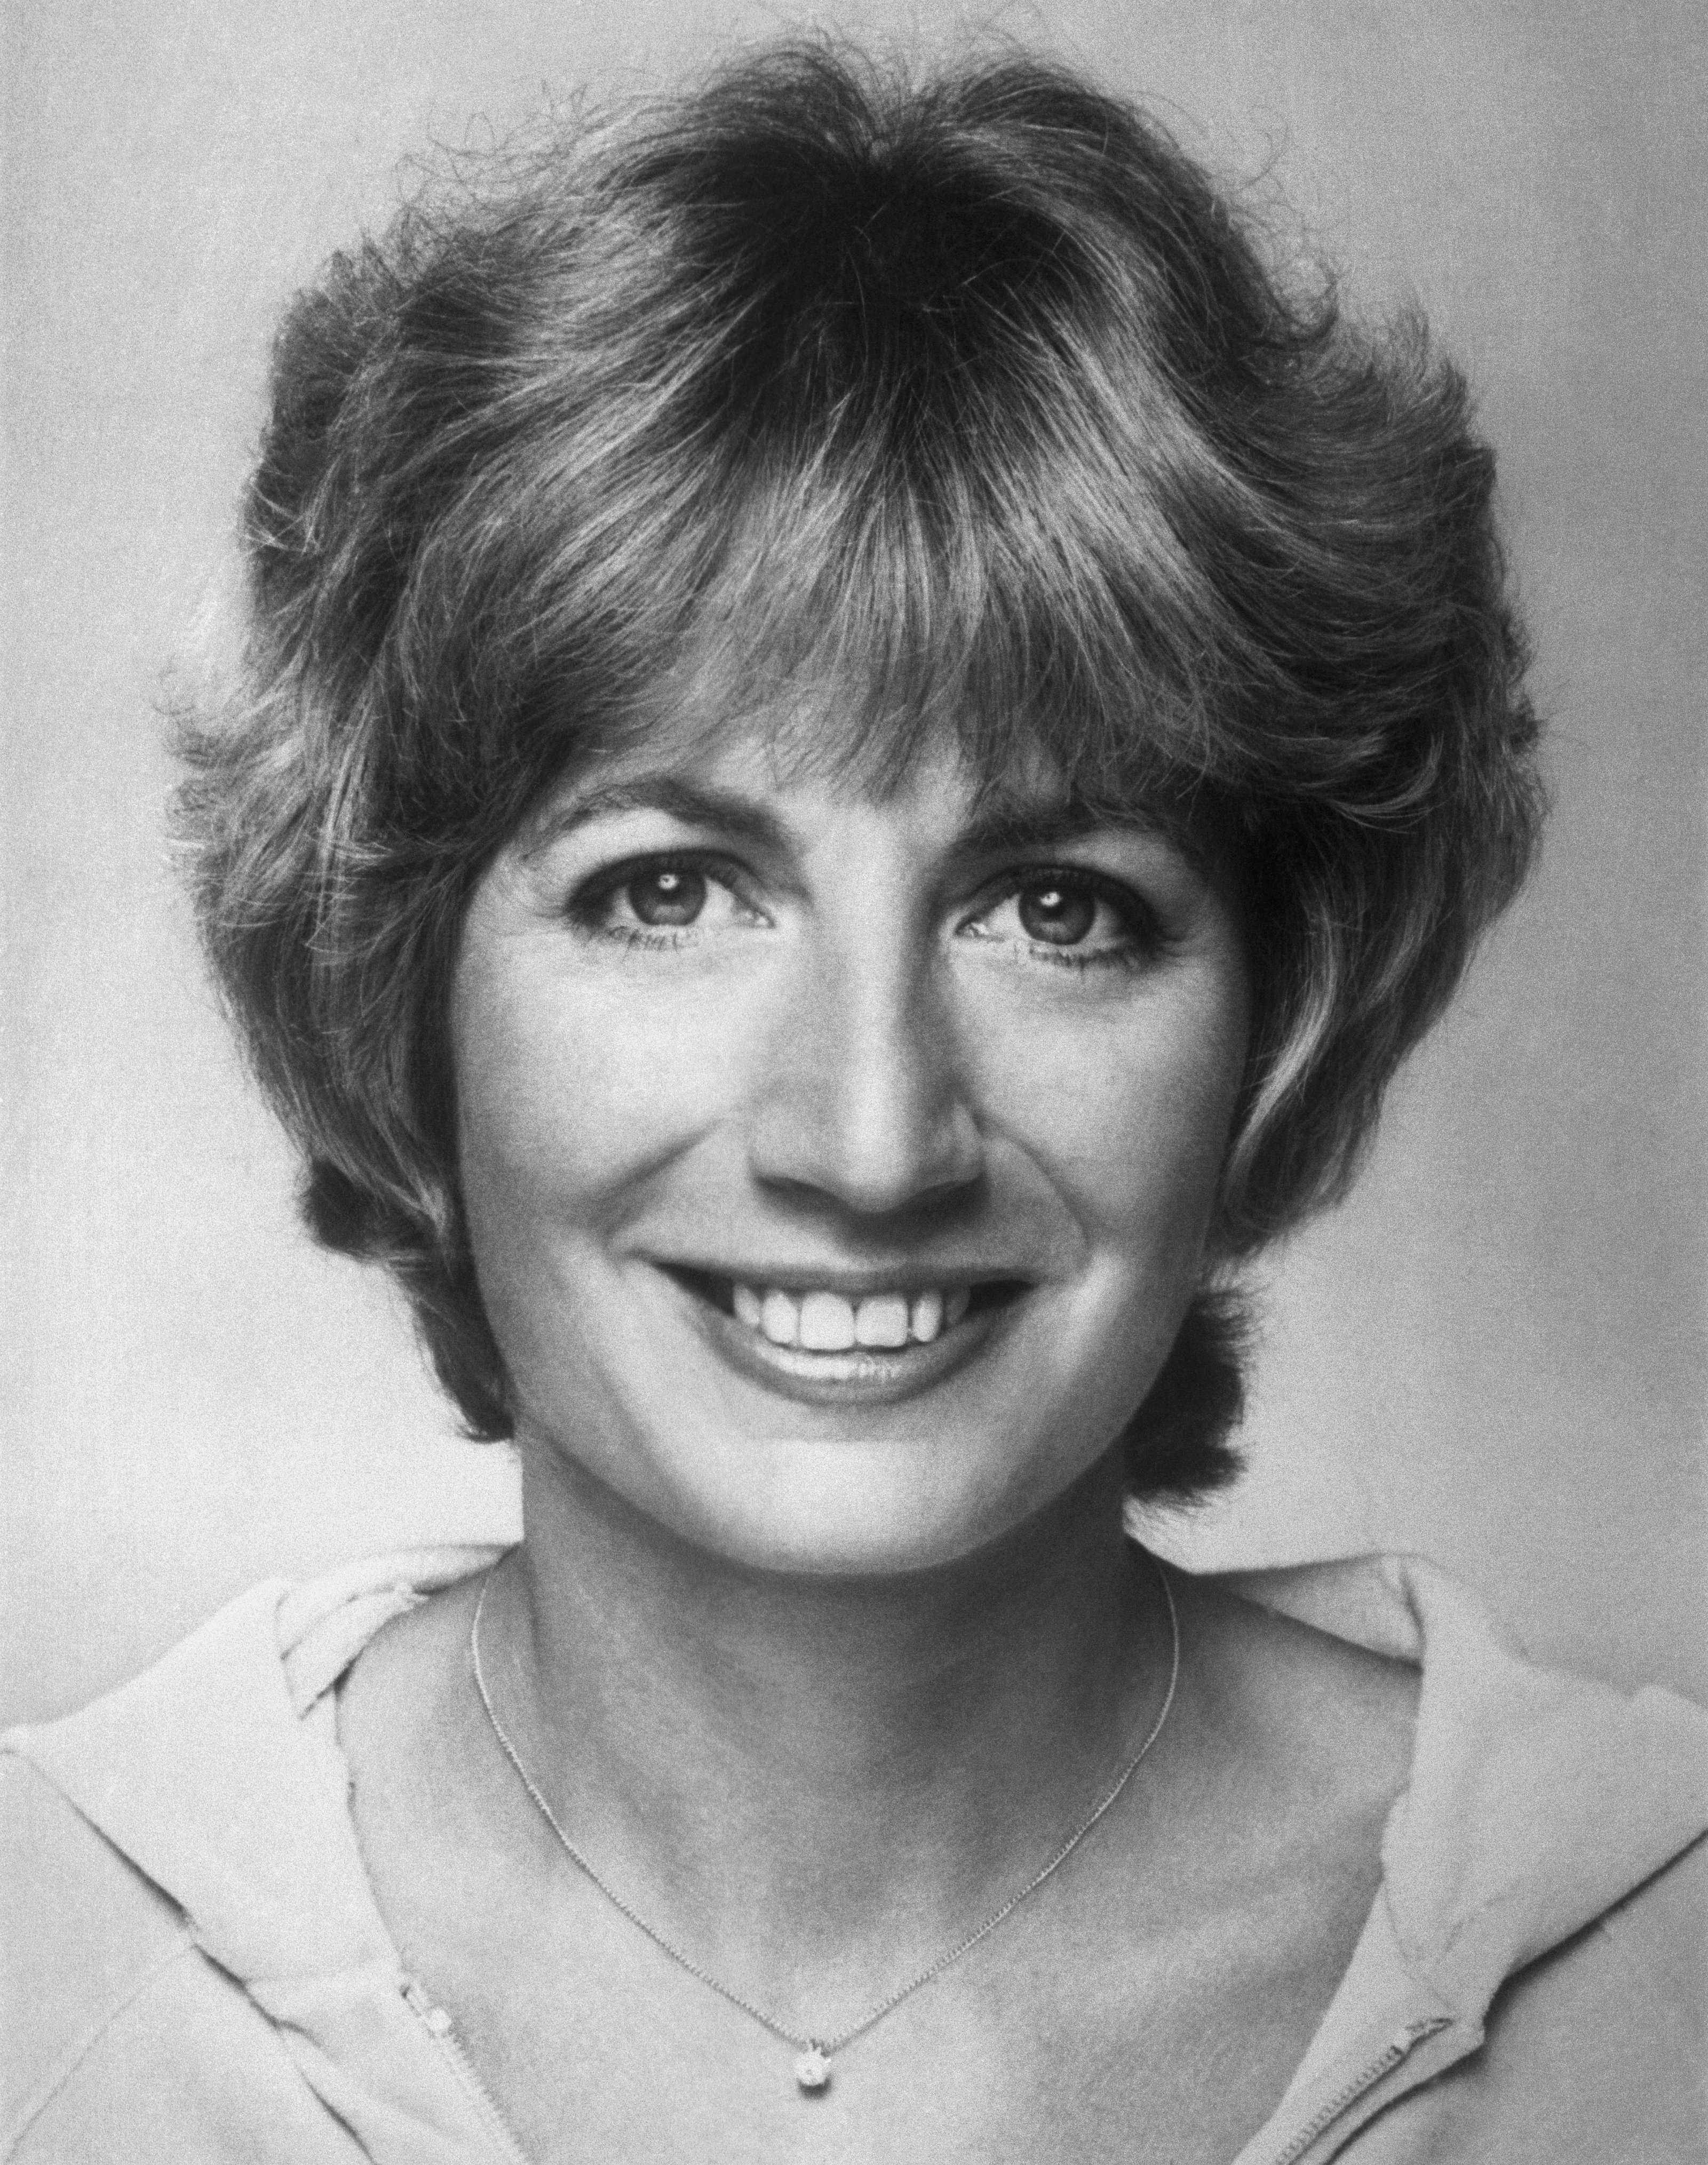 Penny Marshall as she appeared on the 1970's series, "Laverne & Shirley," which starred Penny Marshall as Laverne DeFazio. Source: Getty Images